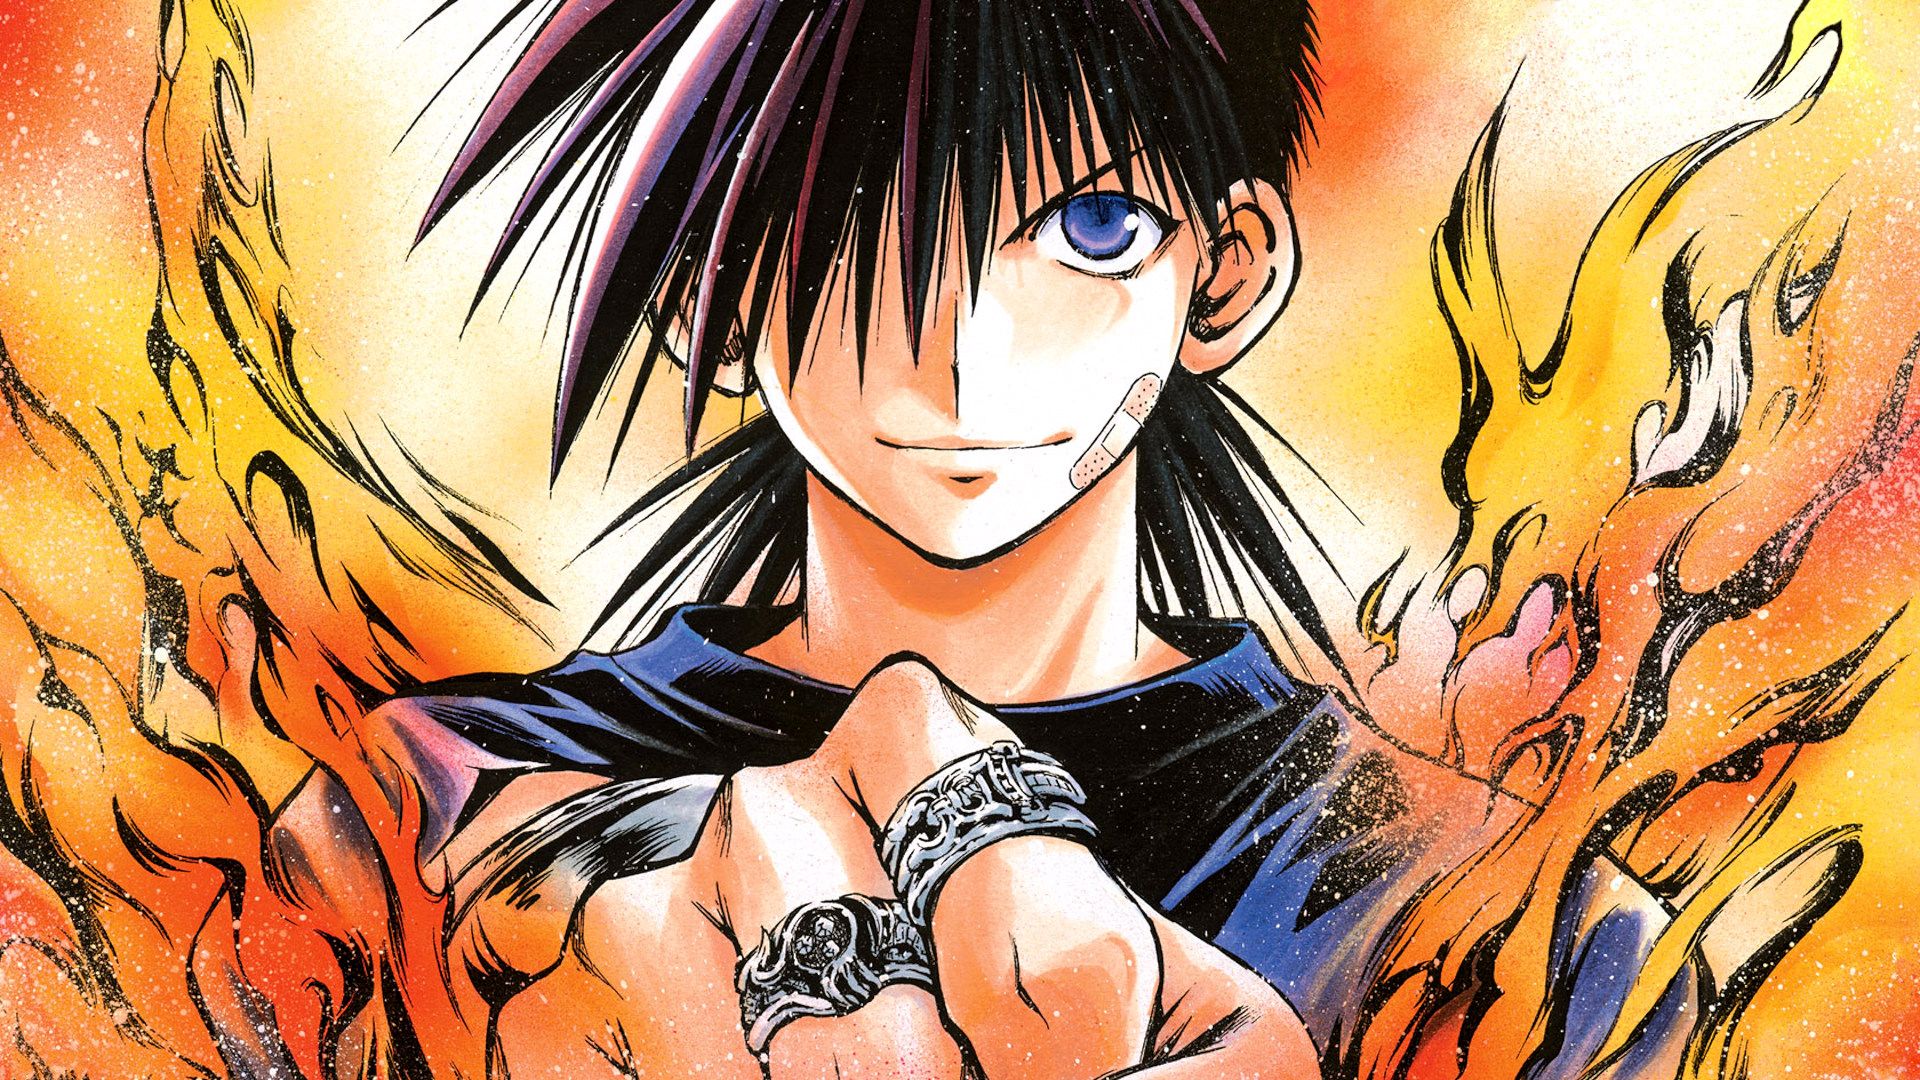 Flame of Recca background